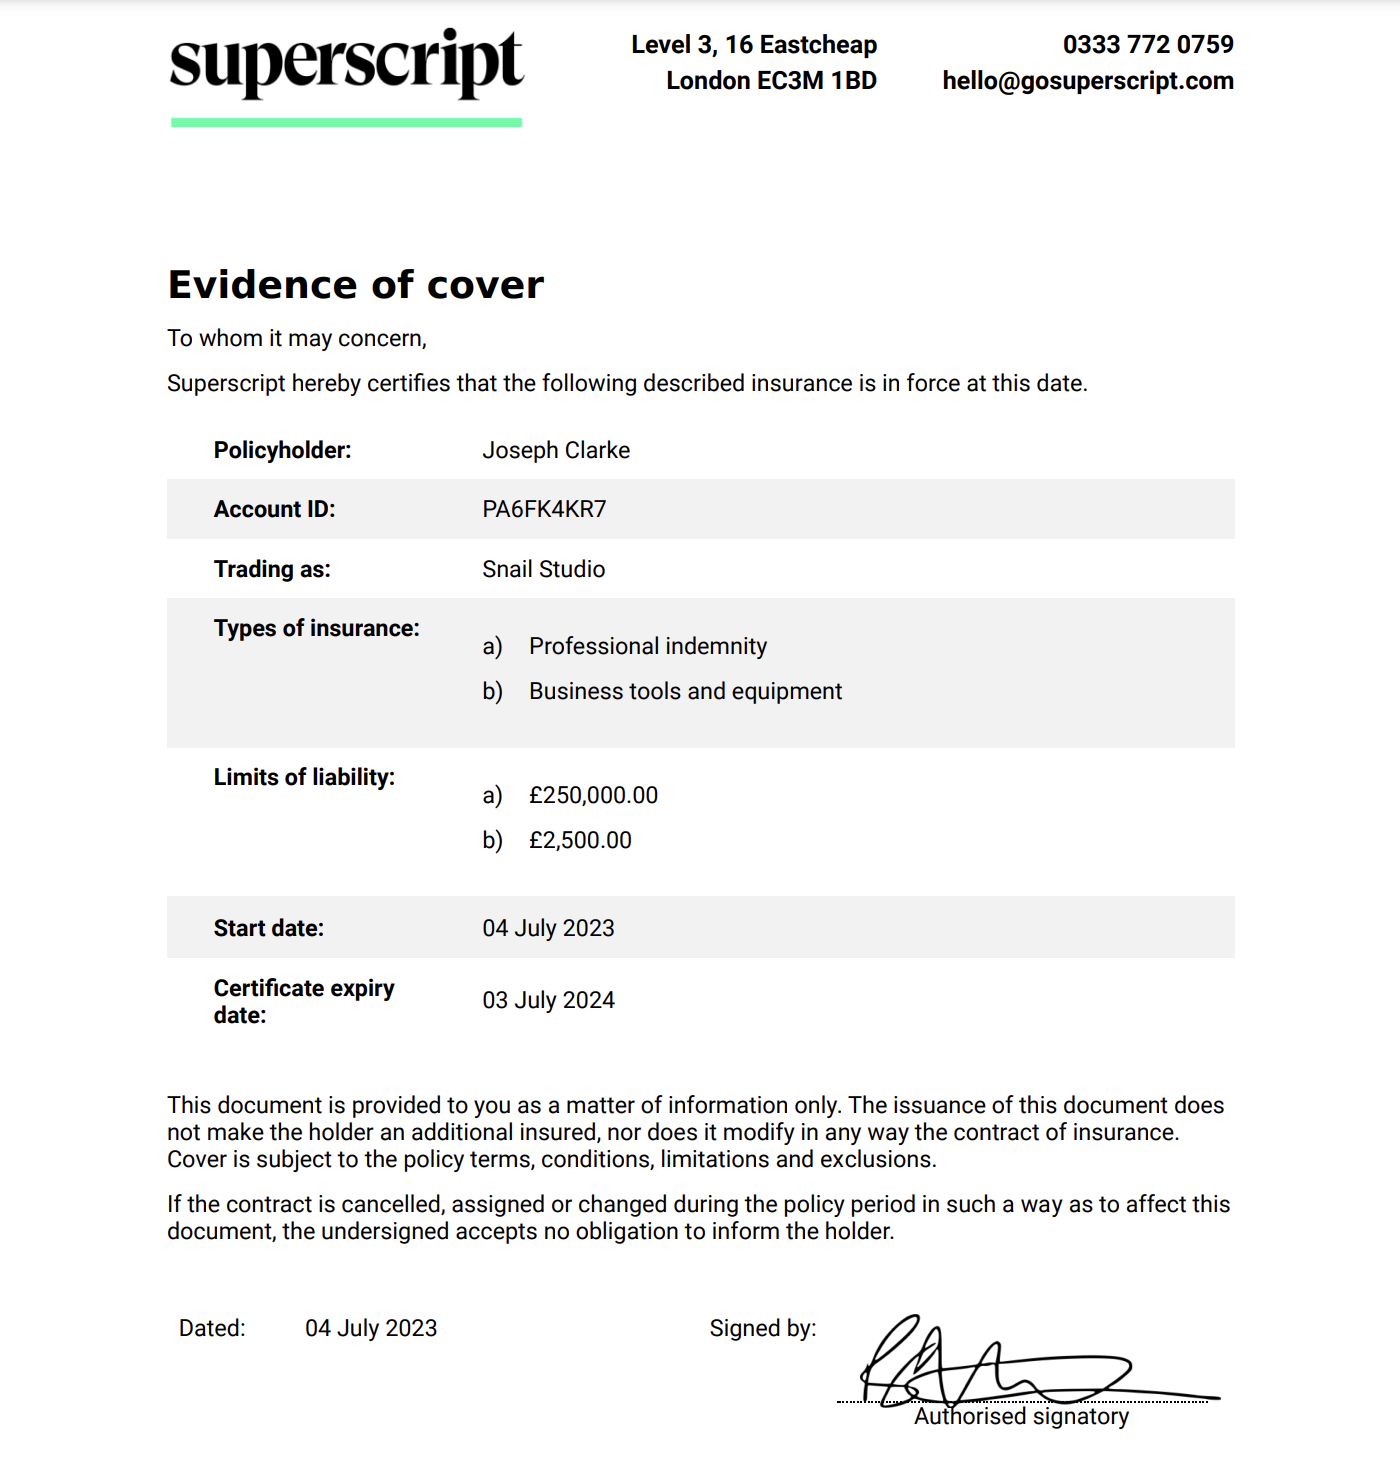 To whom it may concern,
Superscript hereby certifies that the following described insurance is in force at this date.
Policyholder: Joseph Clarke
Account ID: PA6FK4KR7
Trading as: Snail Studio
Types of insurance:
a) Professional indemnity
b) Business tools and equipment
Limits of liability:
a) £250,000.00
b) £2,500.00
Start date: 04 July 2023
Certificate expiry
date: 03 July 2024
This document is provided to you as a matter of information only. The issuance of this document does
not make the holder an additional insured, nor does it modify in any way the contract of insurance.
Cover is subject to the policy terms, conditions, limitations and exclusions.
If the contract is cancelled, assigned or changed during the policy period in such a way as to affect this
document, the undersigned accepts no obligation to inform the holder.